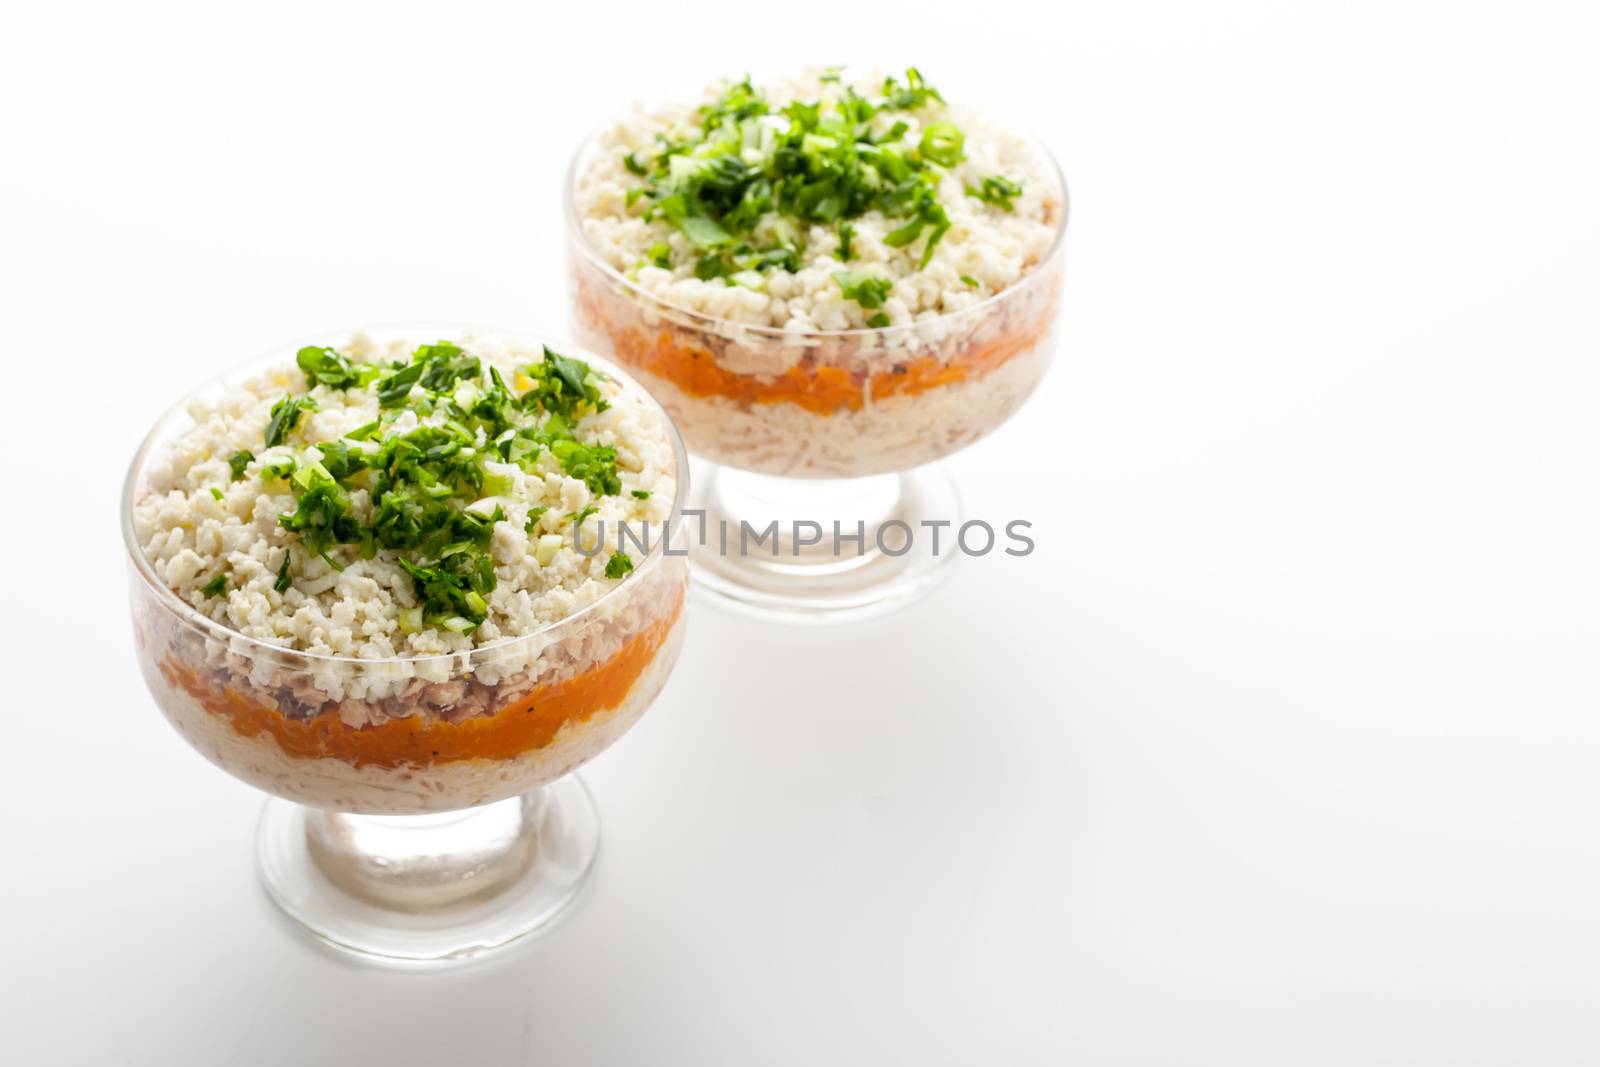 Layered salad with eggs and fish on the glass dish horizontal